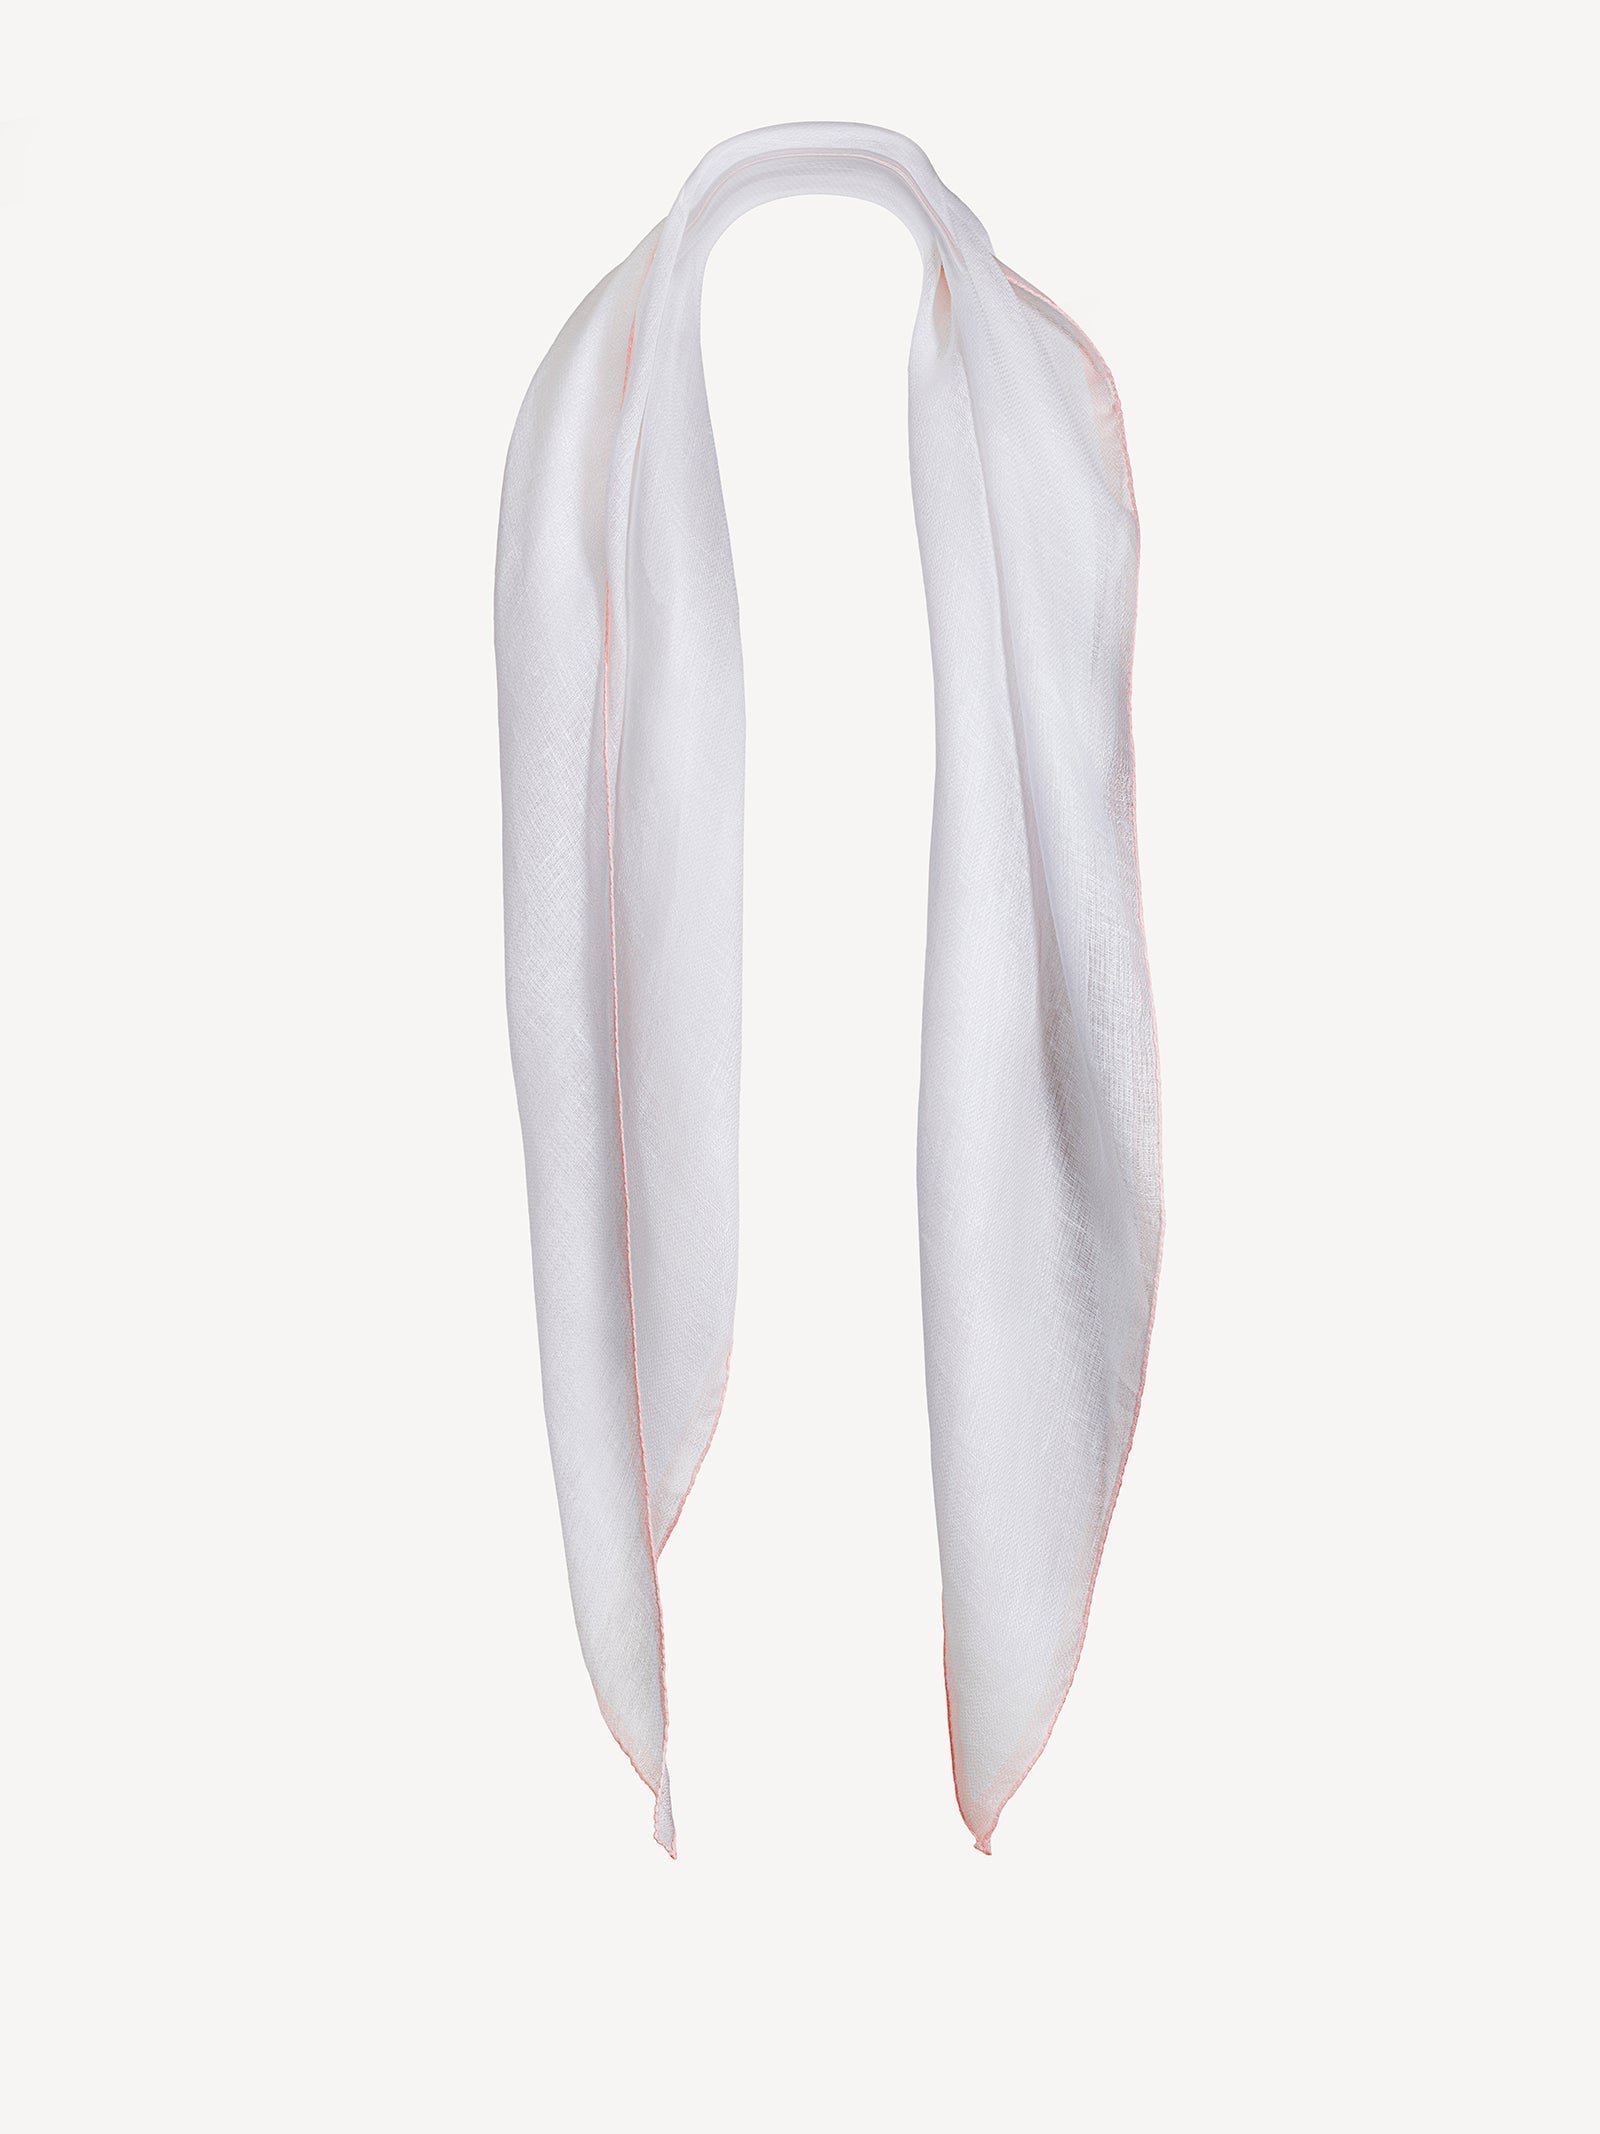 Rhombus Linen Scarf for women 100% Capri white and pink linen scarf